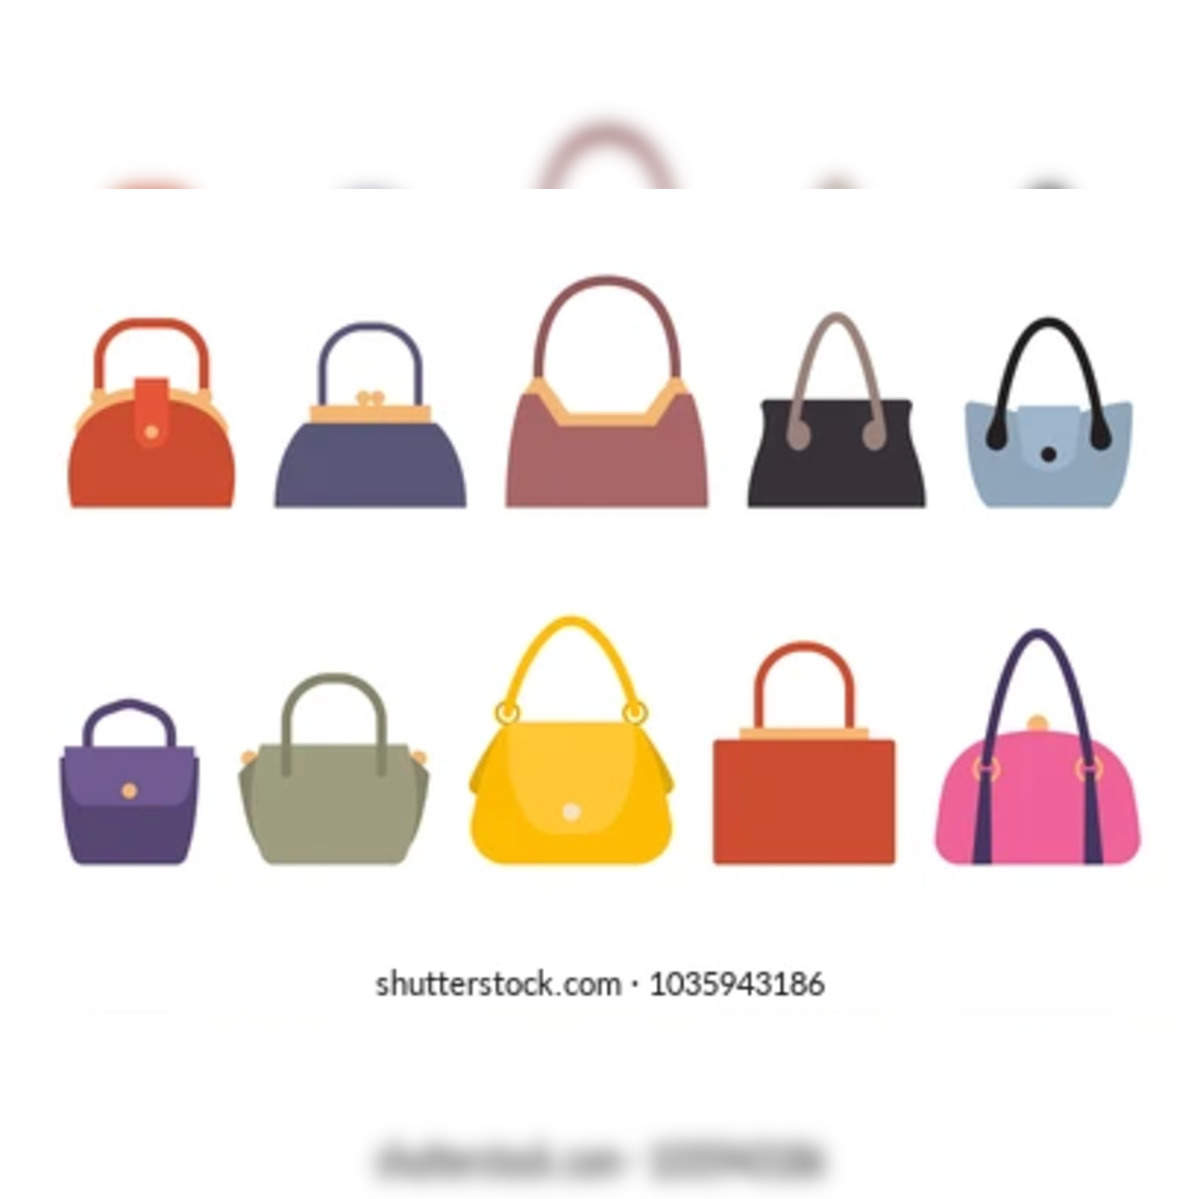 How to choose a bag to your body type properly? | Italian E-Learning  Fashion School